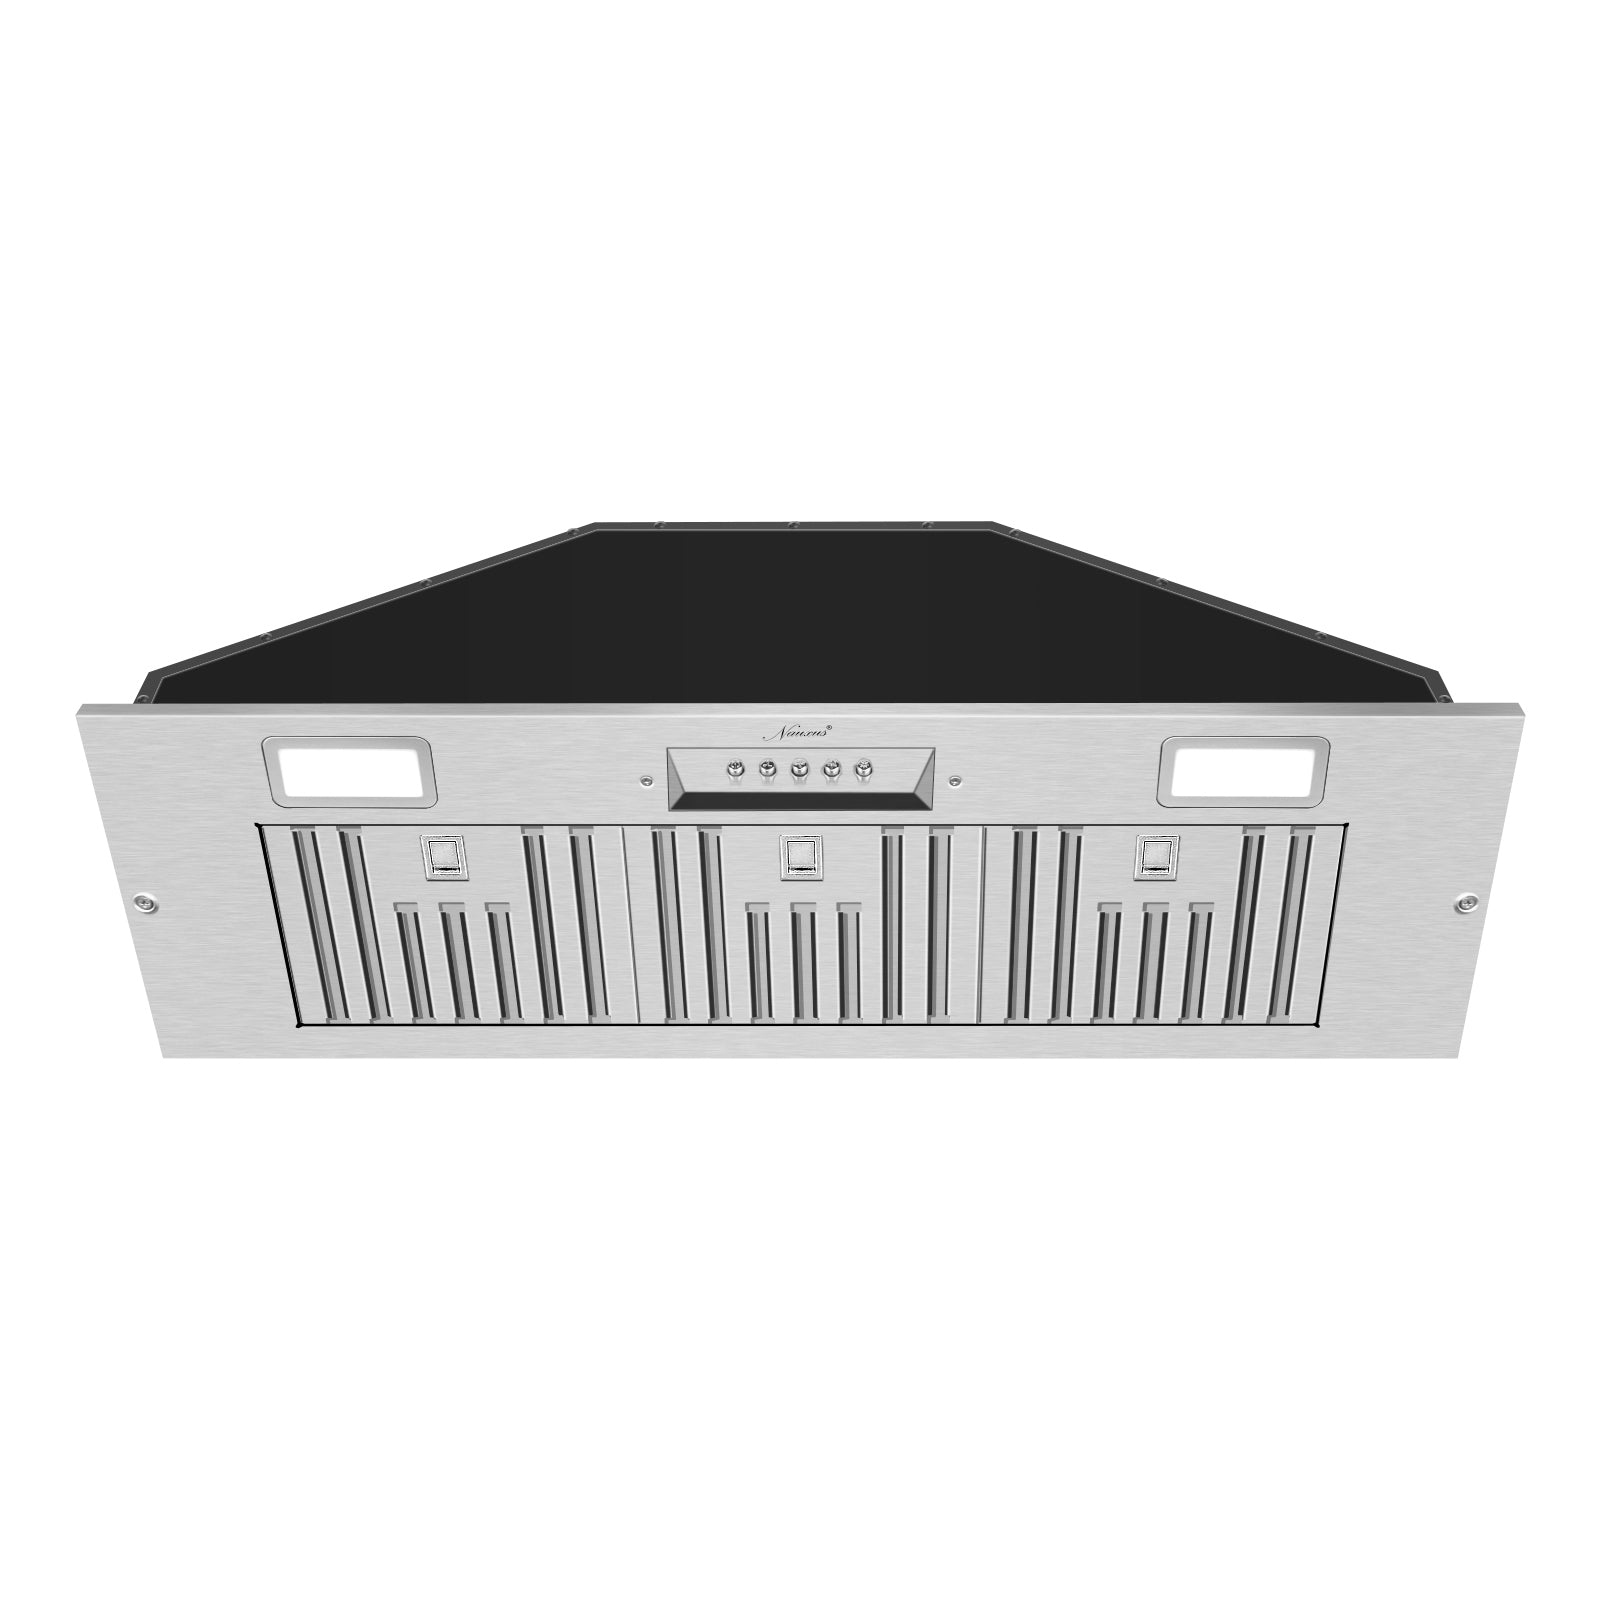 Range Hood Insert 36 Inch, 600 CFM Built-in Kitchen Hood with 3 Speeds, Ultra-Quiet Stainless Steel Ducted Vent Hood Insert with LED Lights and Dishwasher Safe Filters